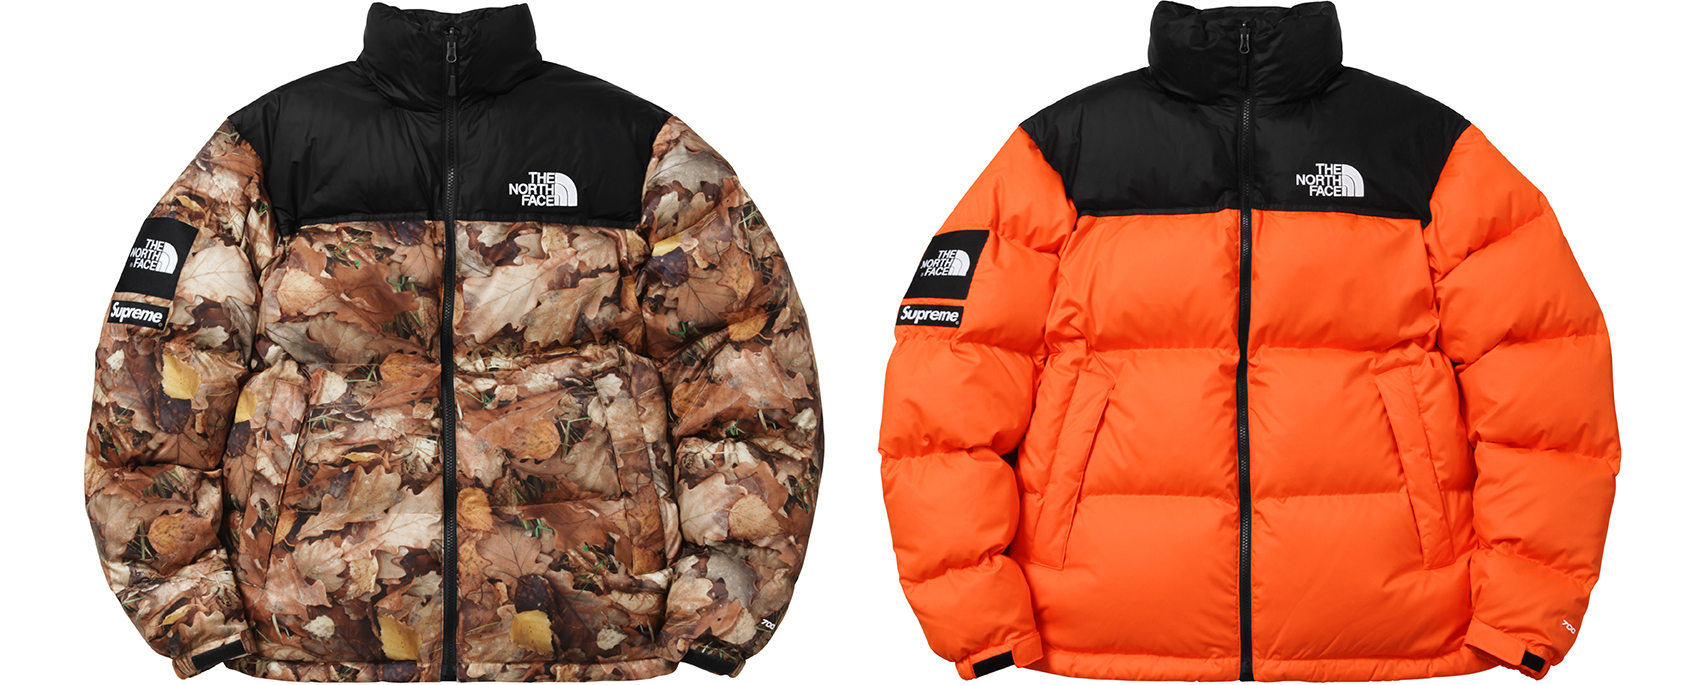 Supreme x The North Face Fall/Winter 2016 Collection – PAUSE